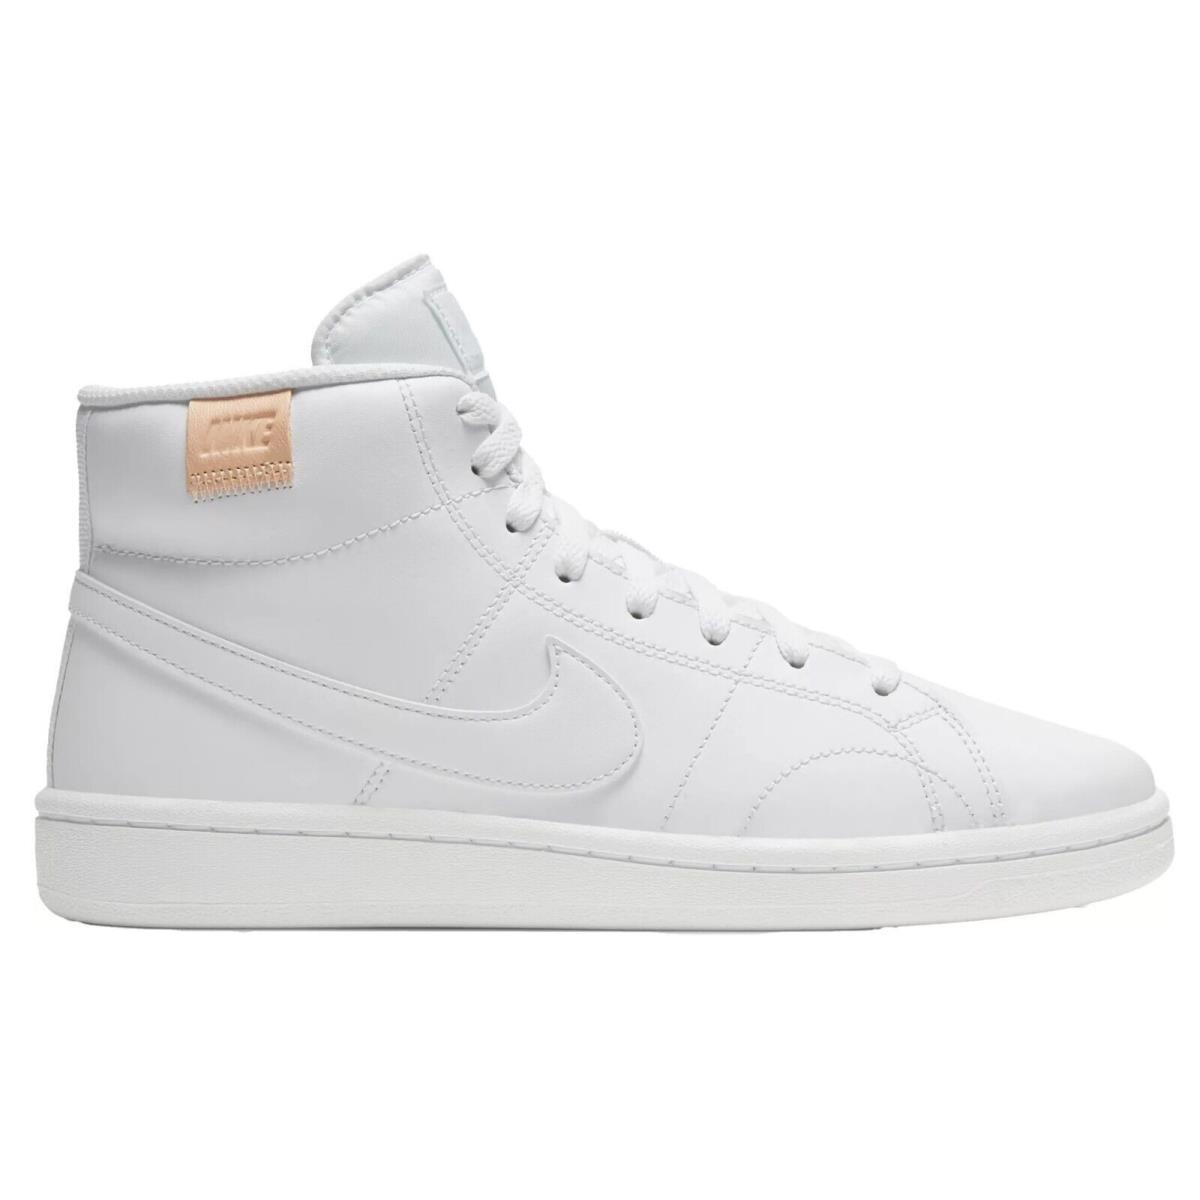 Nike Court Royale 2 Mid Womens CT1725-100 All White Shoes Sneakers - White, way: White/White